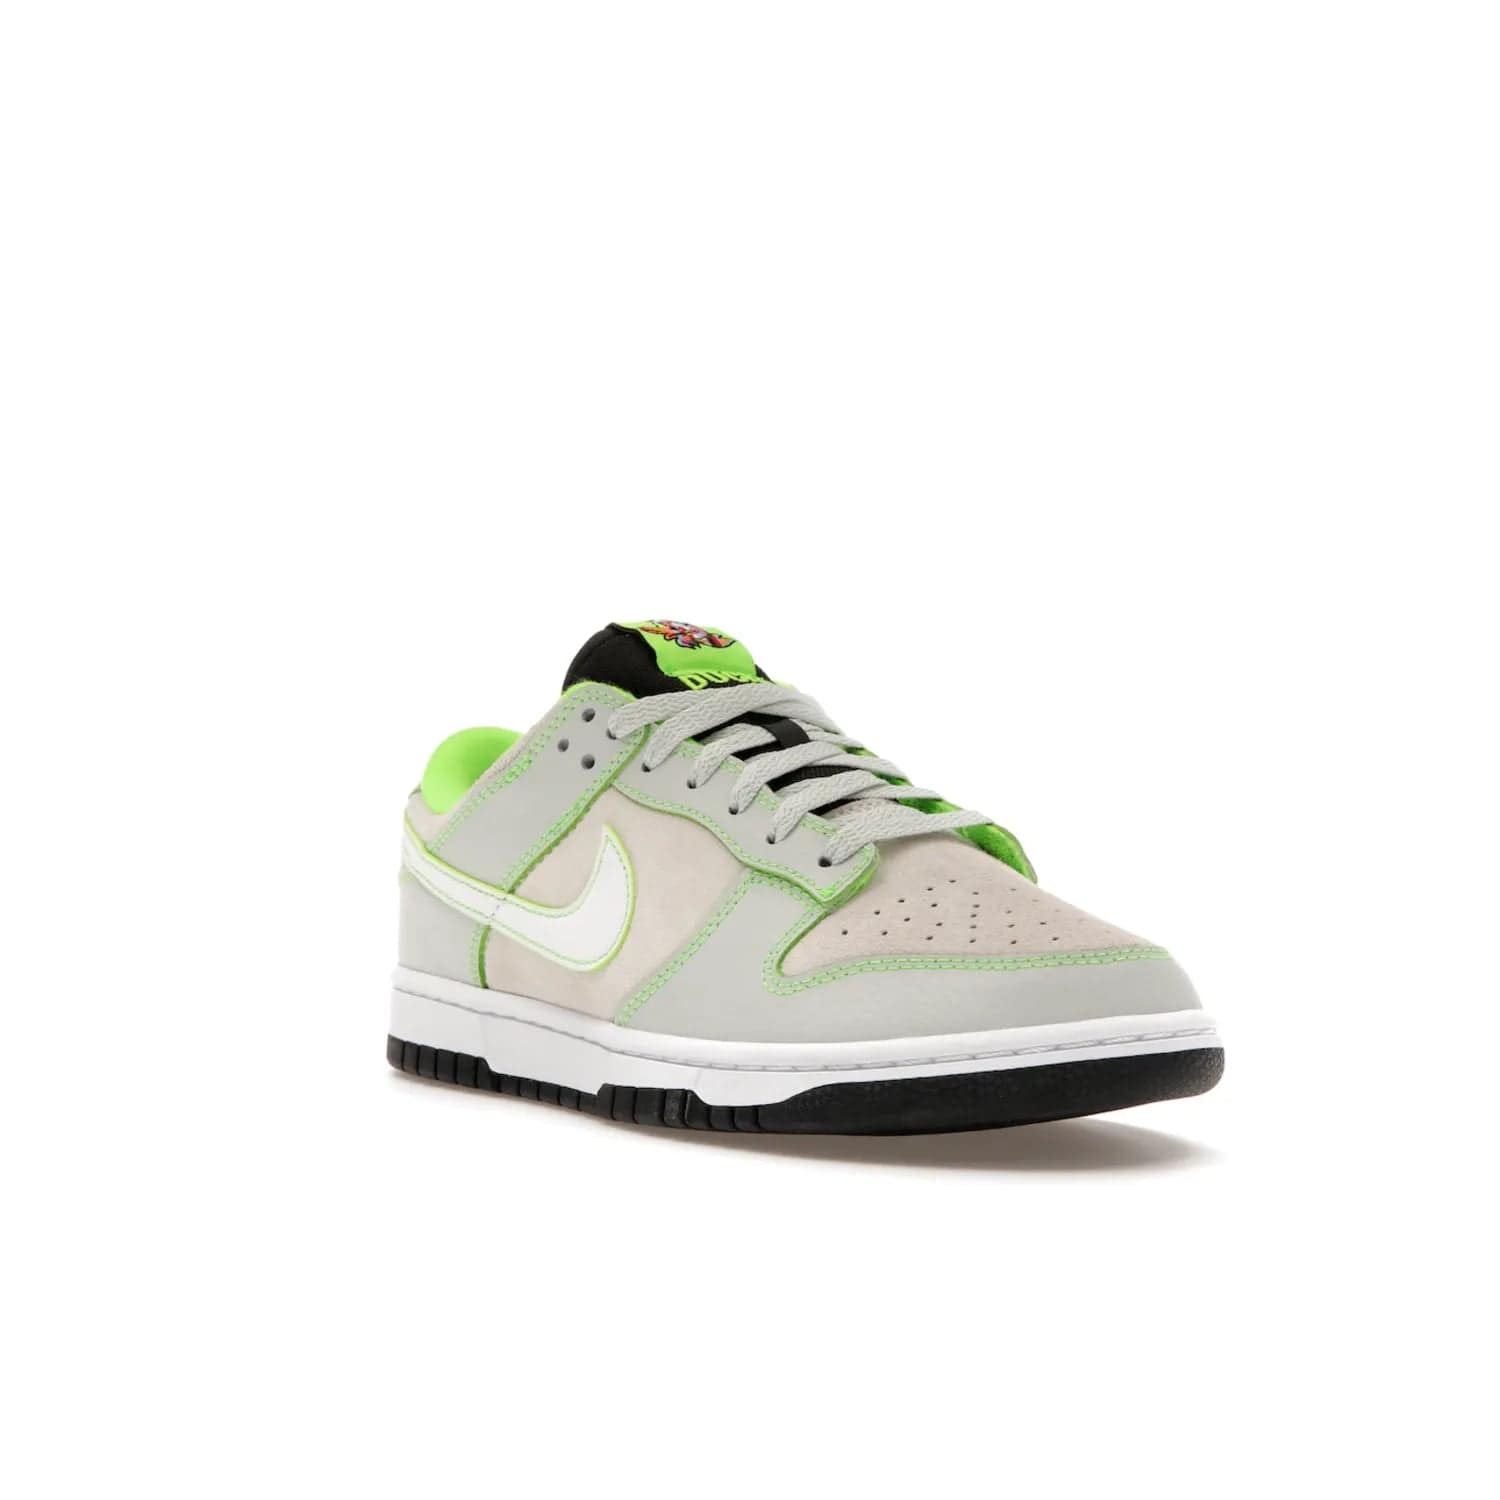 Nike Dunk Low University of Oregon PE (2023) - Image 6 - Only at www.BallersClubKickz.com - Sleek Light Silver and White upper, complemented by Black and Electric Green accents. Nike Dunk Low University of Oregon PE, set to be released April 2023. Must-have for any serious fan.